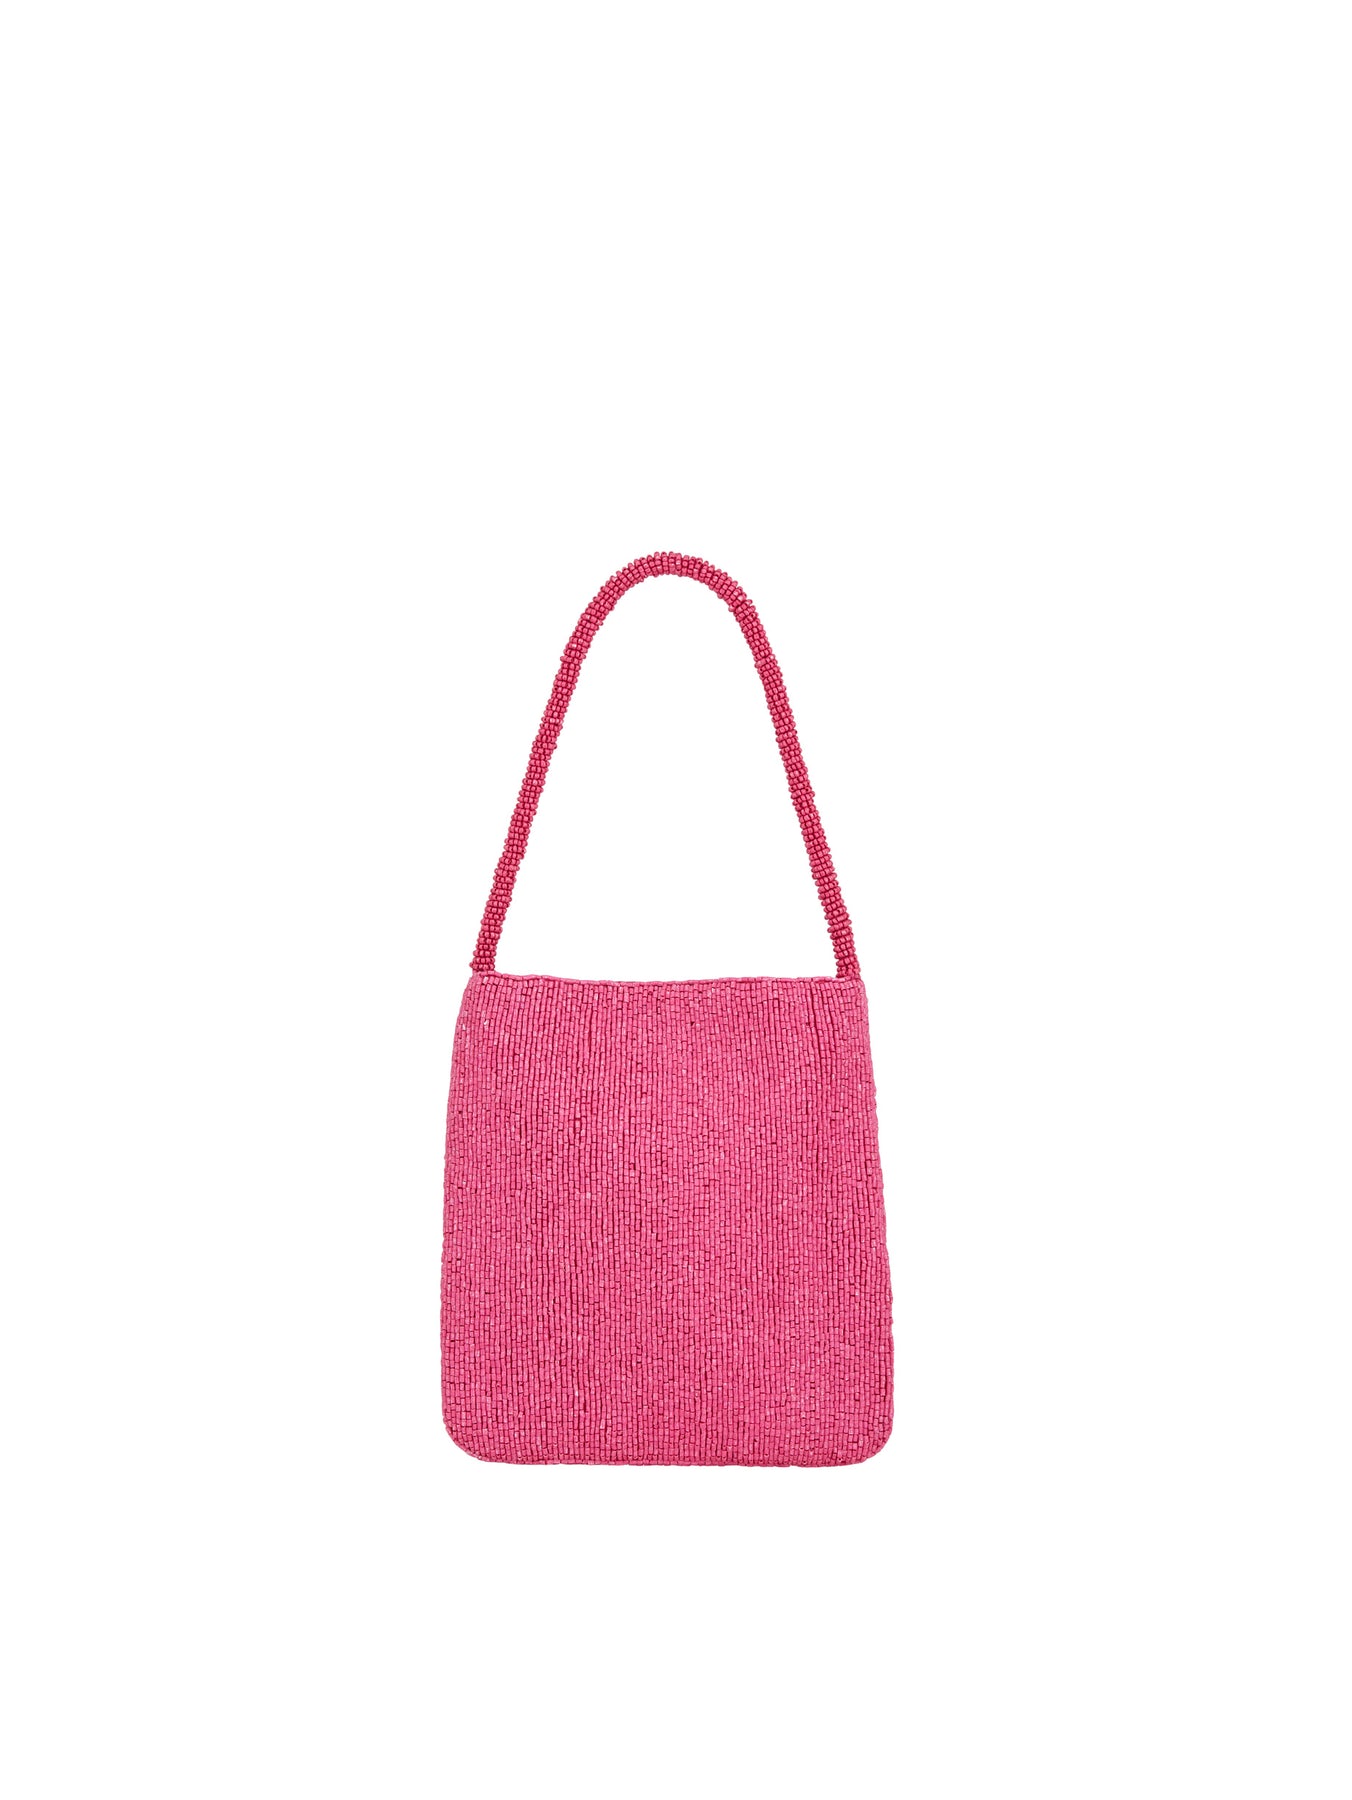 Lustrous Nyra Bag - Hot Pink